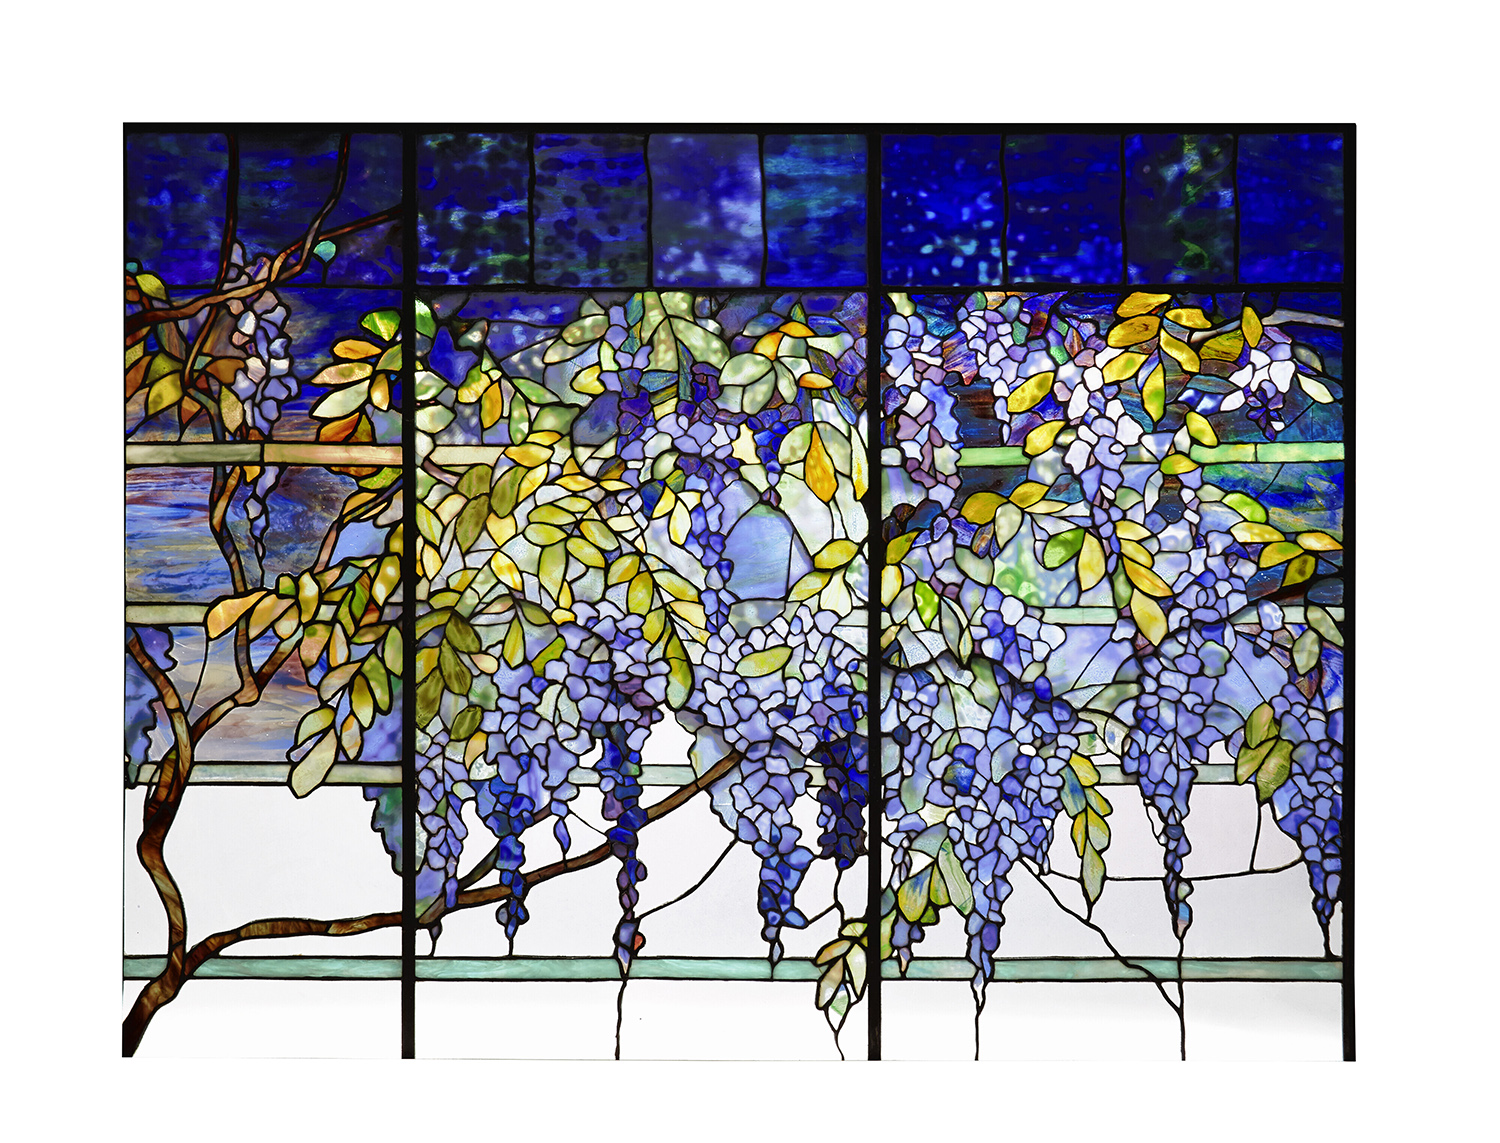 Masterworks of Louis Comfort Tiffany, 1st Edition at 1stDibs